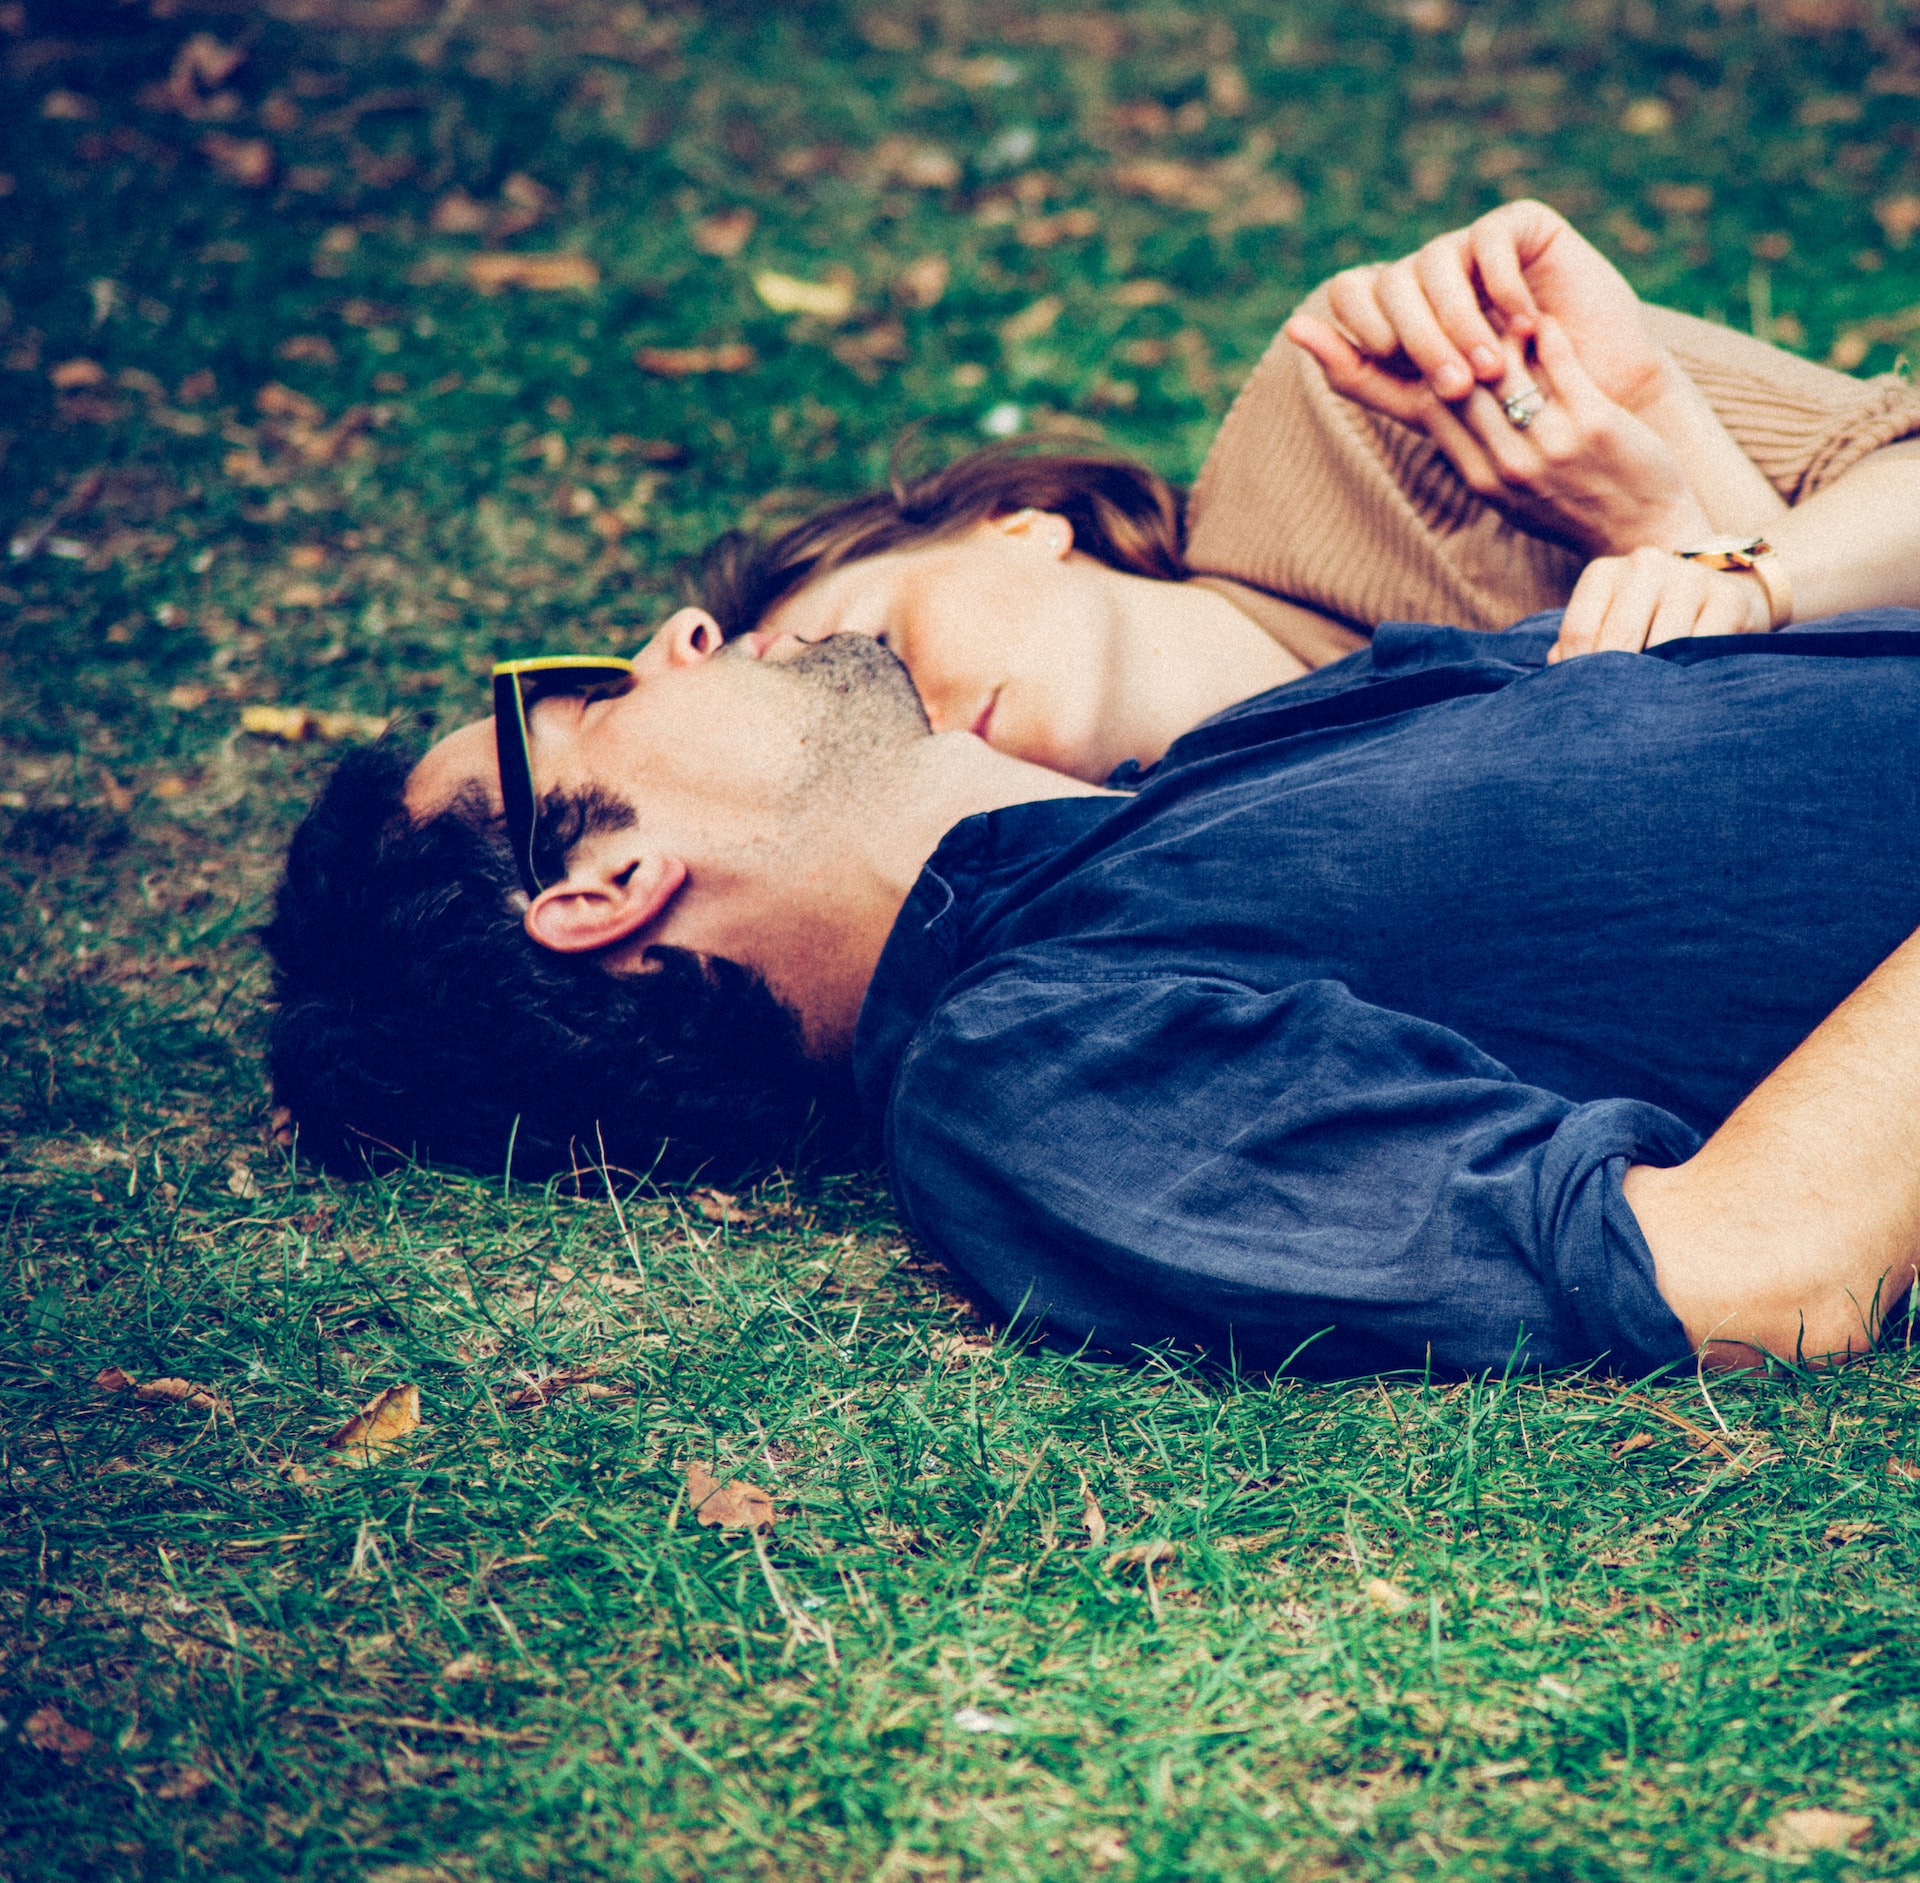 Dreaming About An Ex - The Secret Meaning Behind Your Dreams